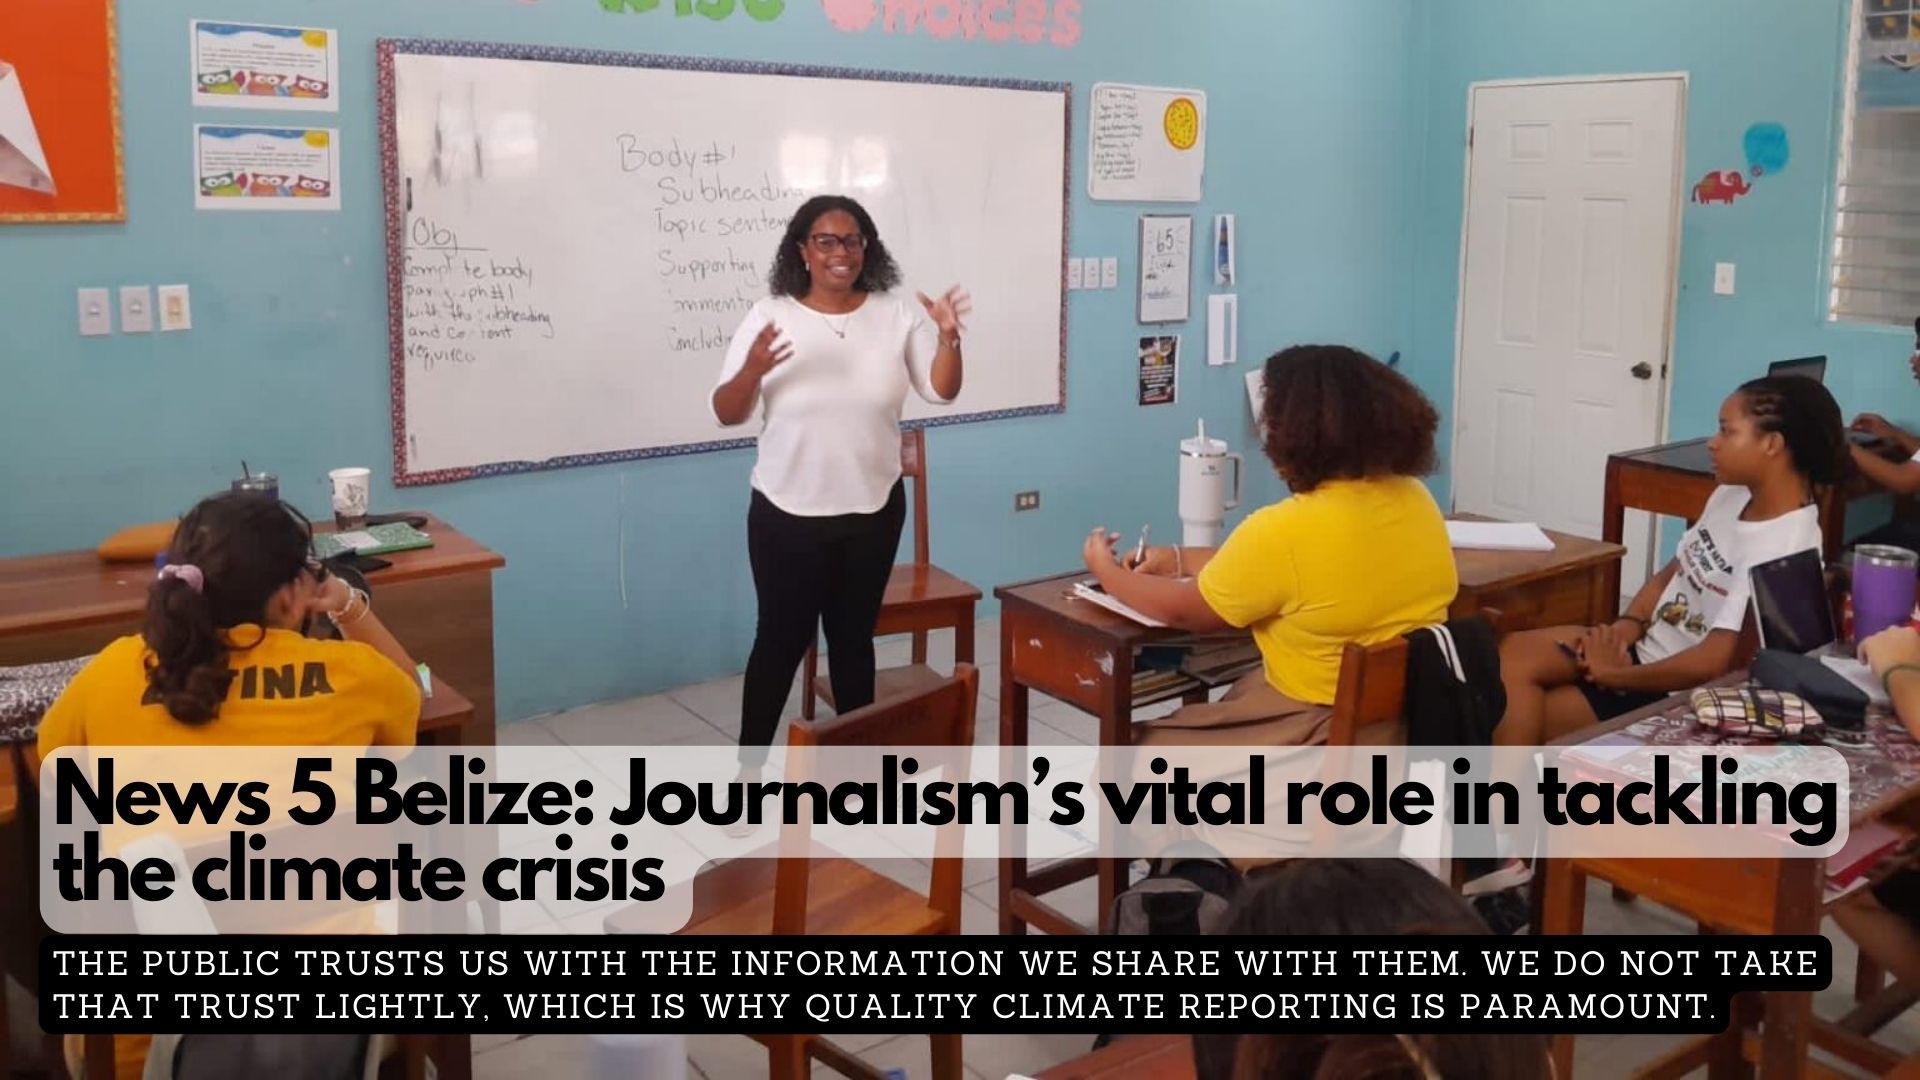 News 5 Belize: Journalism’s vital role in tackling the climate crisis